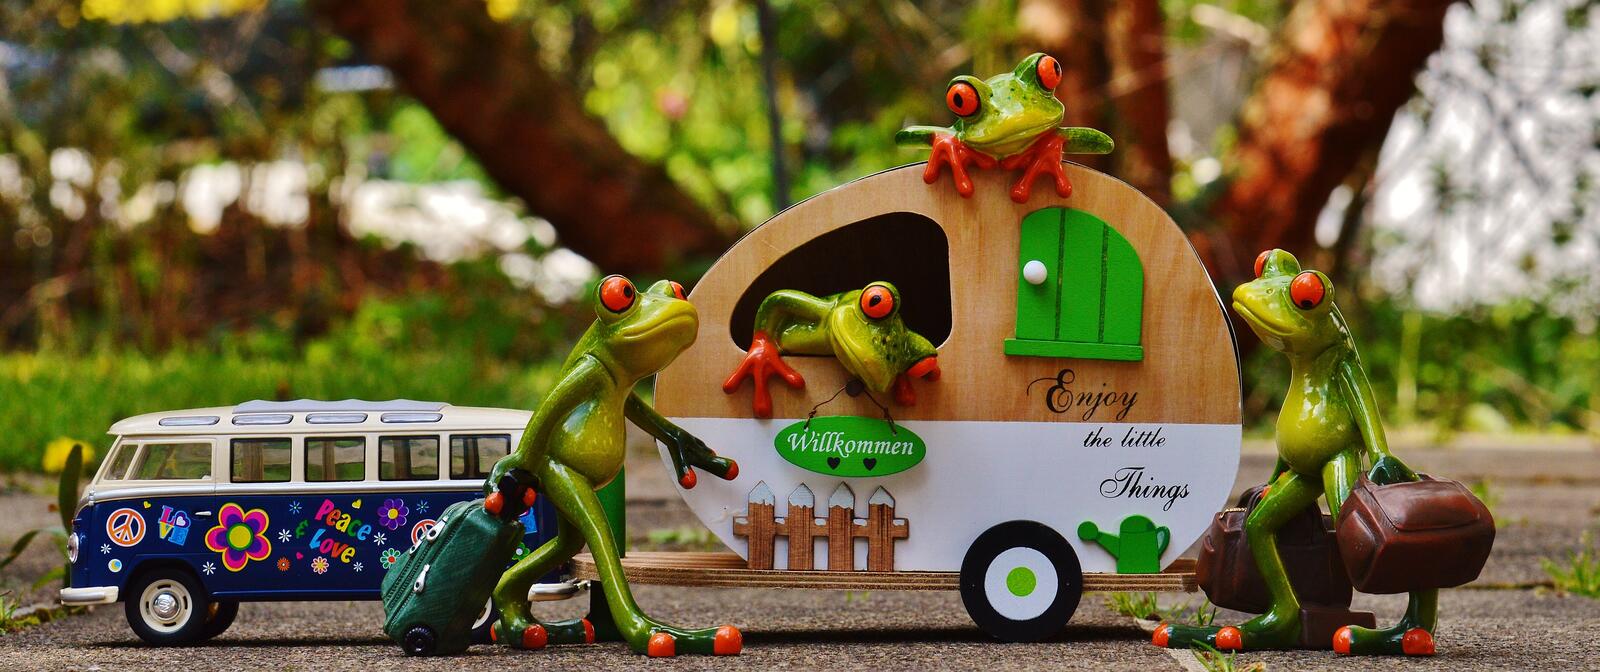 Free photo The Frogs are going on a vacation in a motorhome